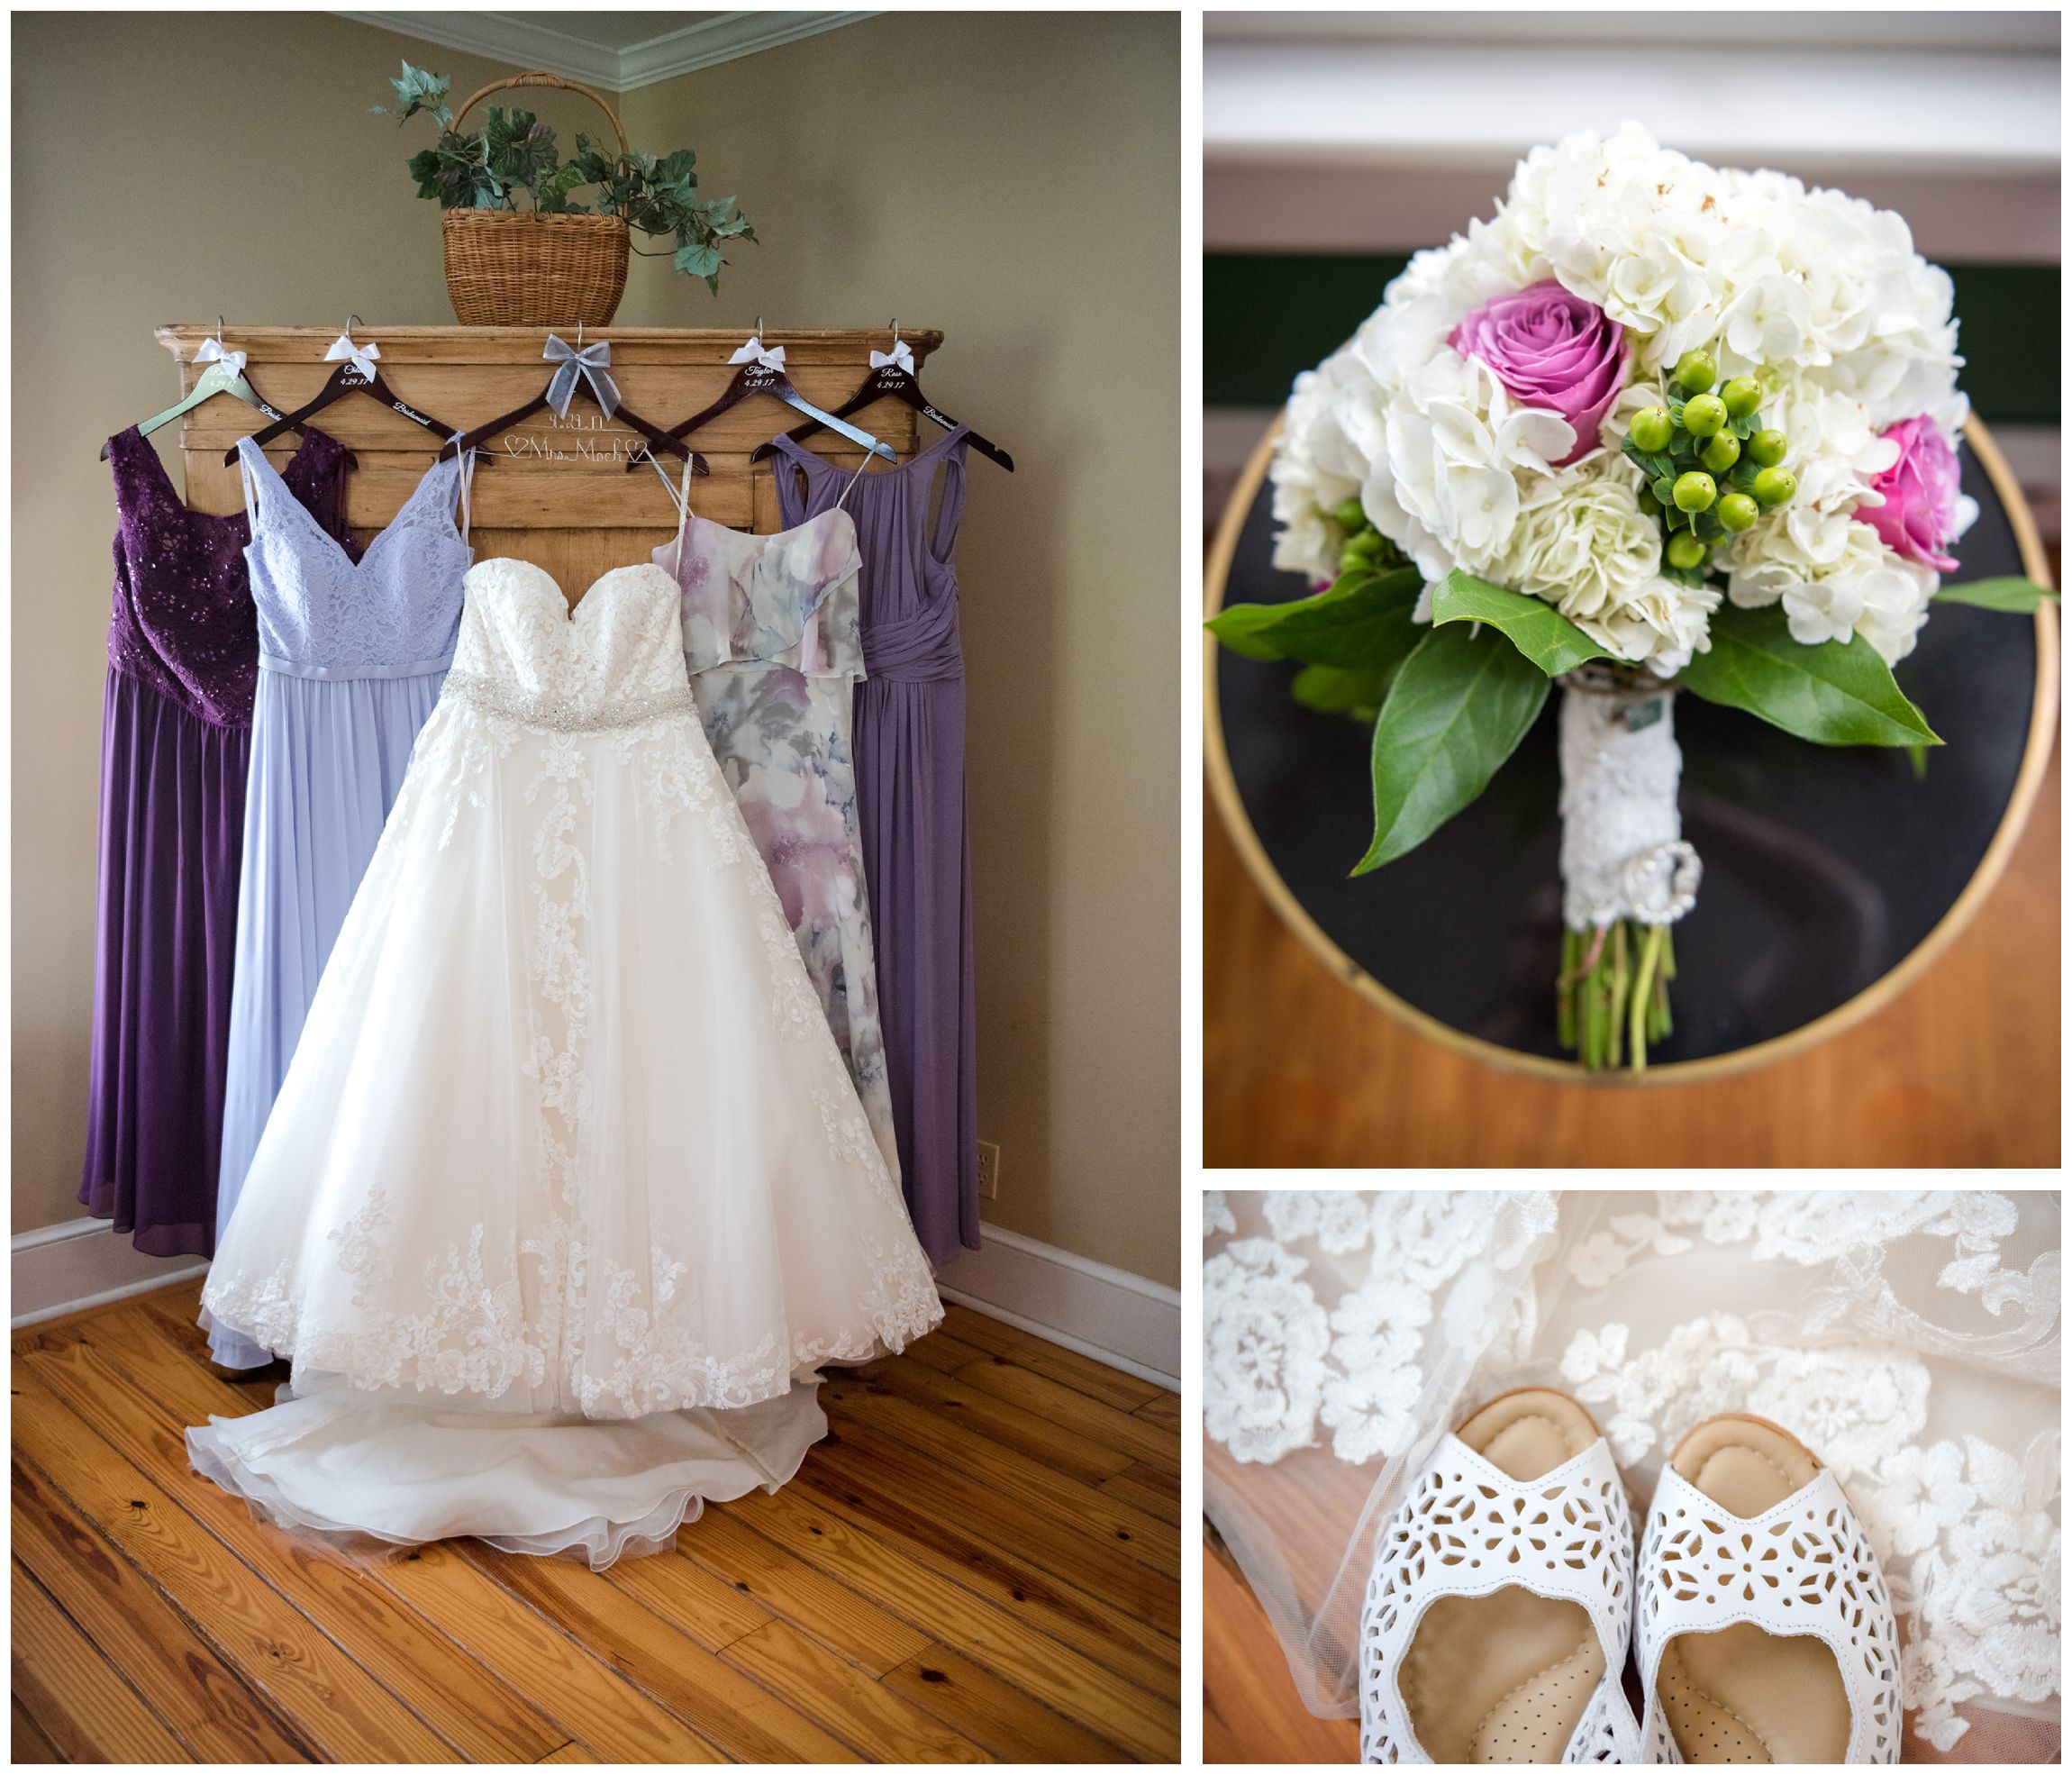 rustic wedding details including bride's gown and bridesmaid dresses, bouquet and shoes